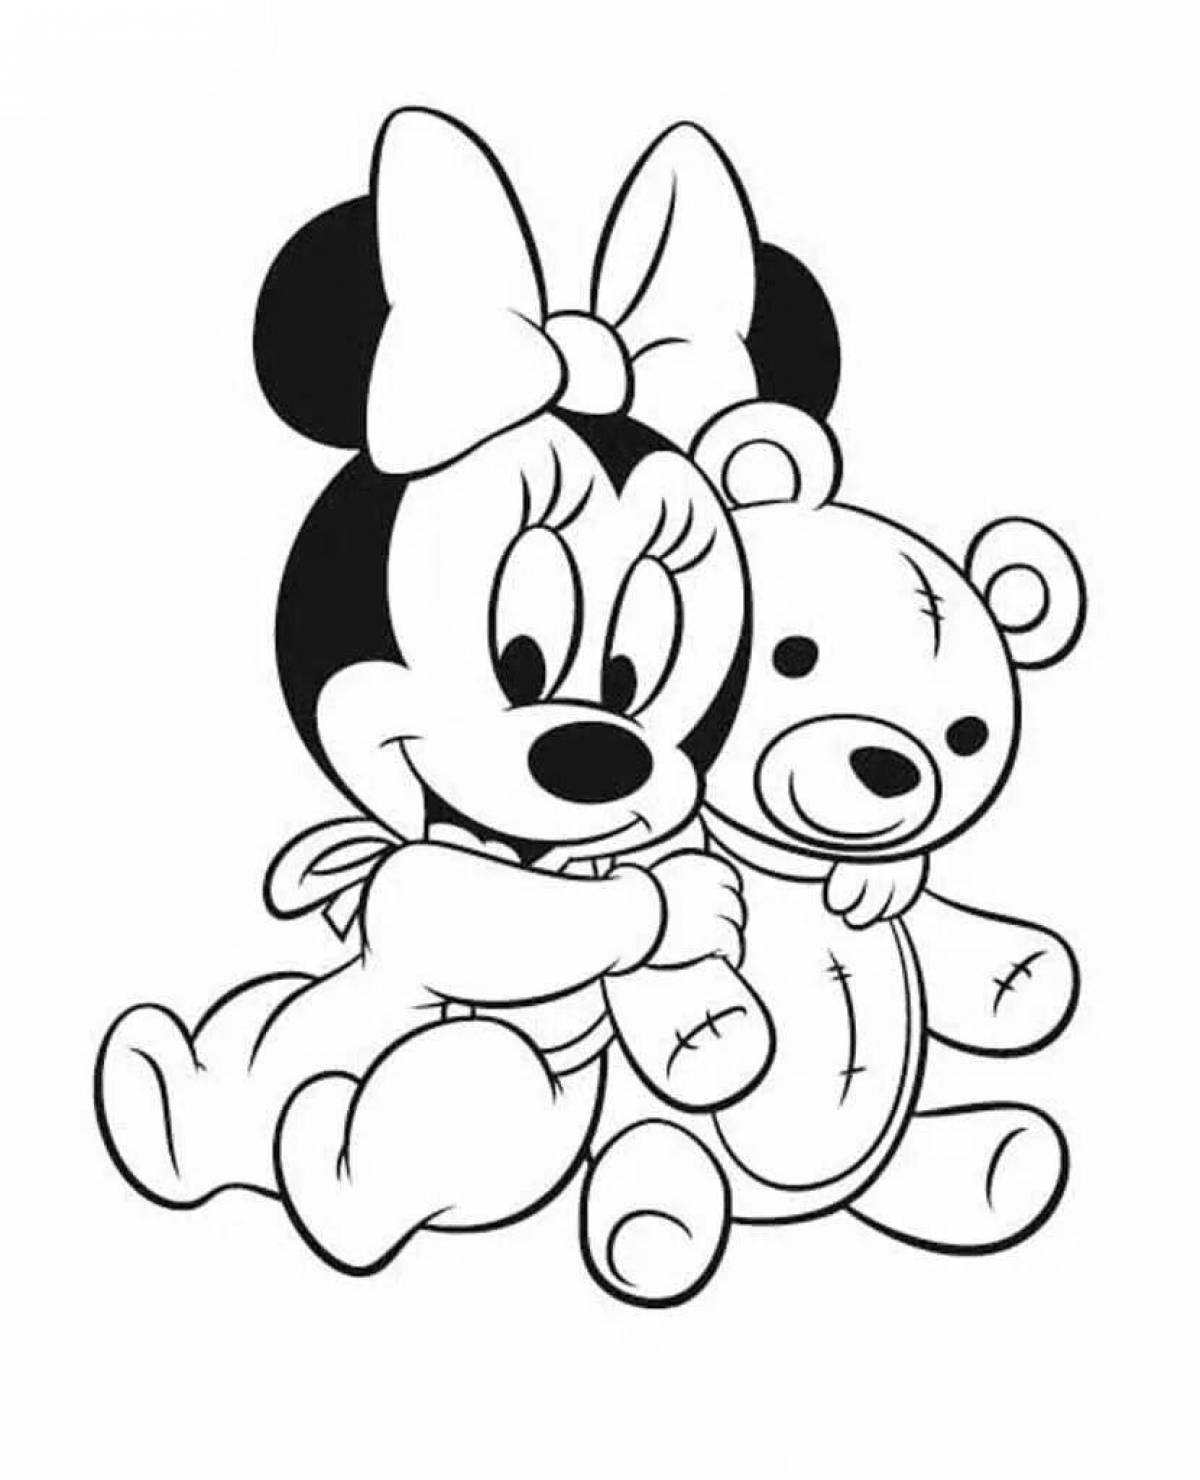 Minnie mouse radiant coloring book for kids